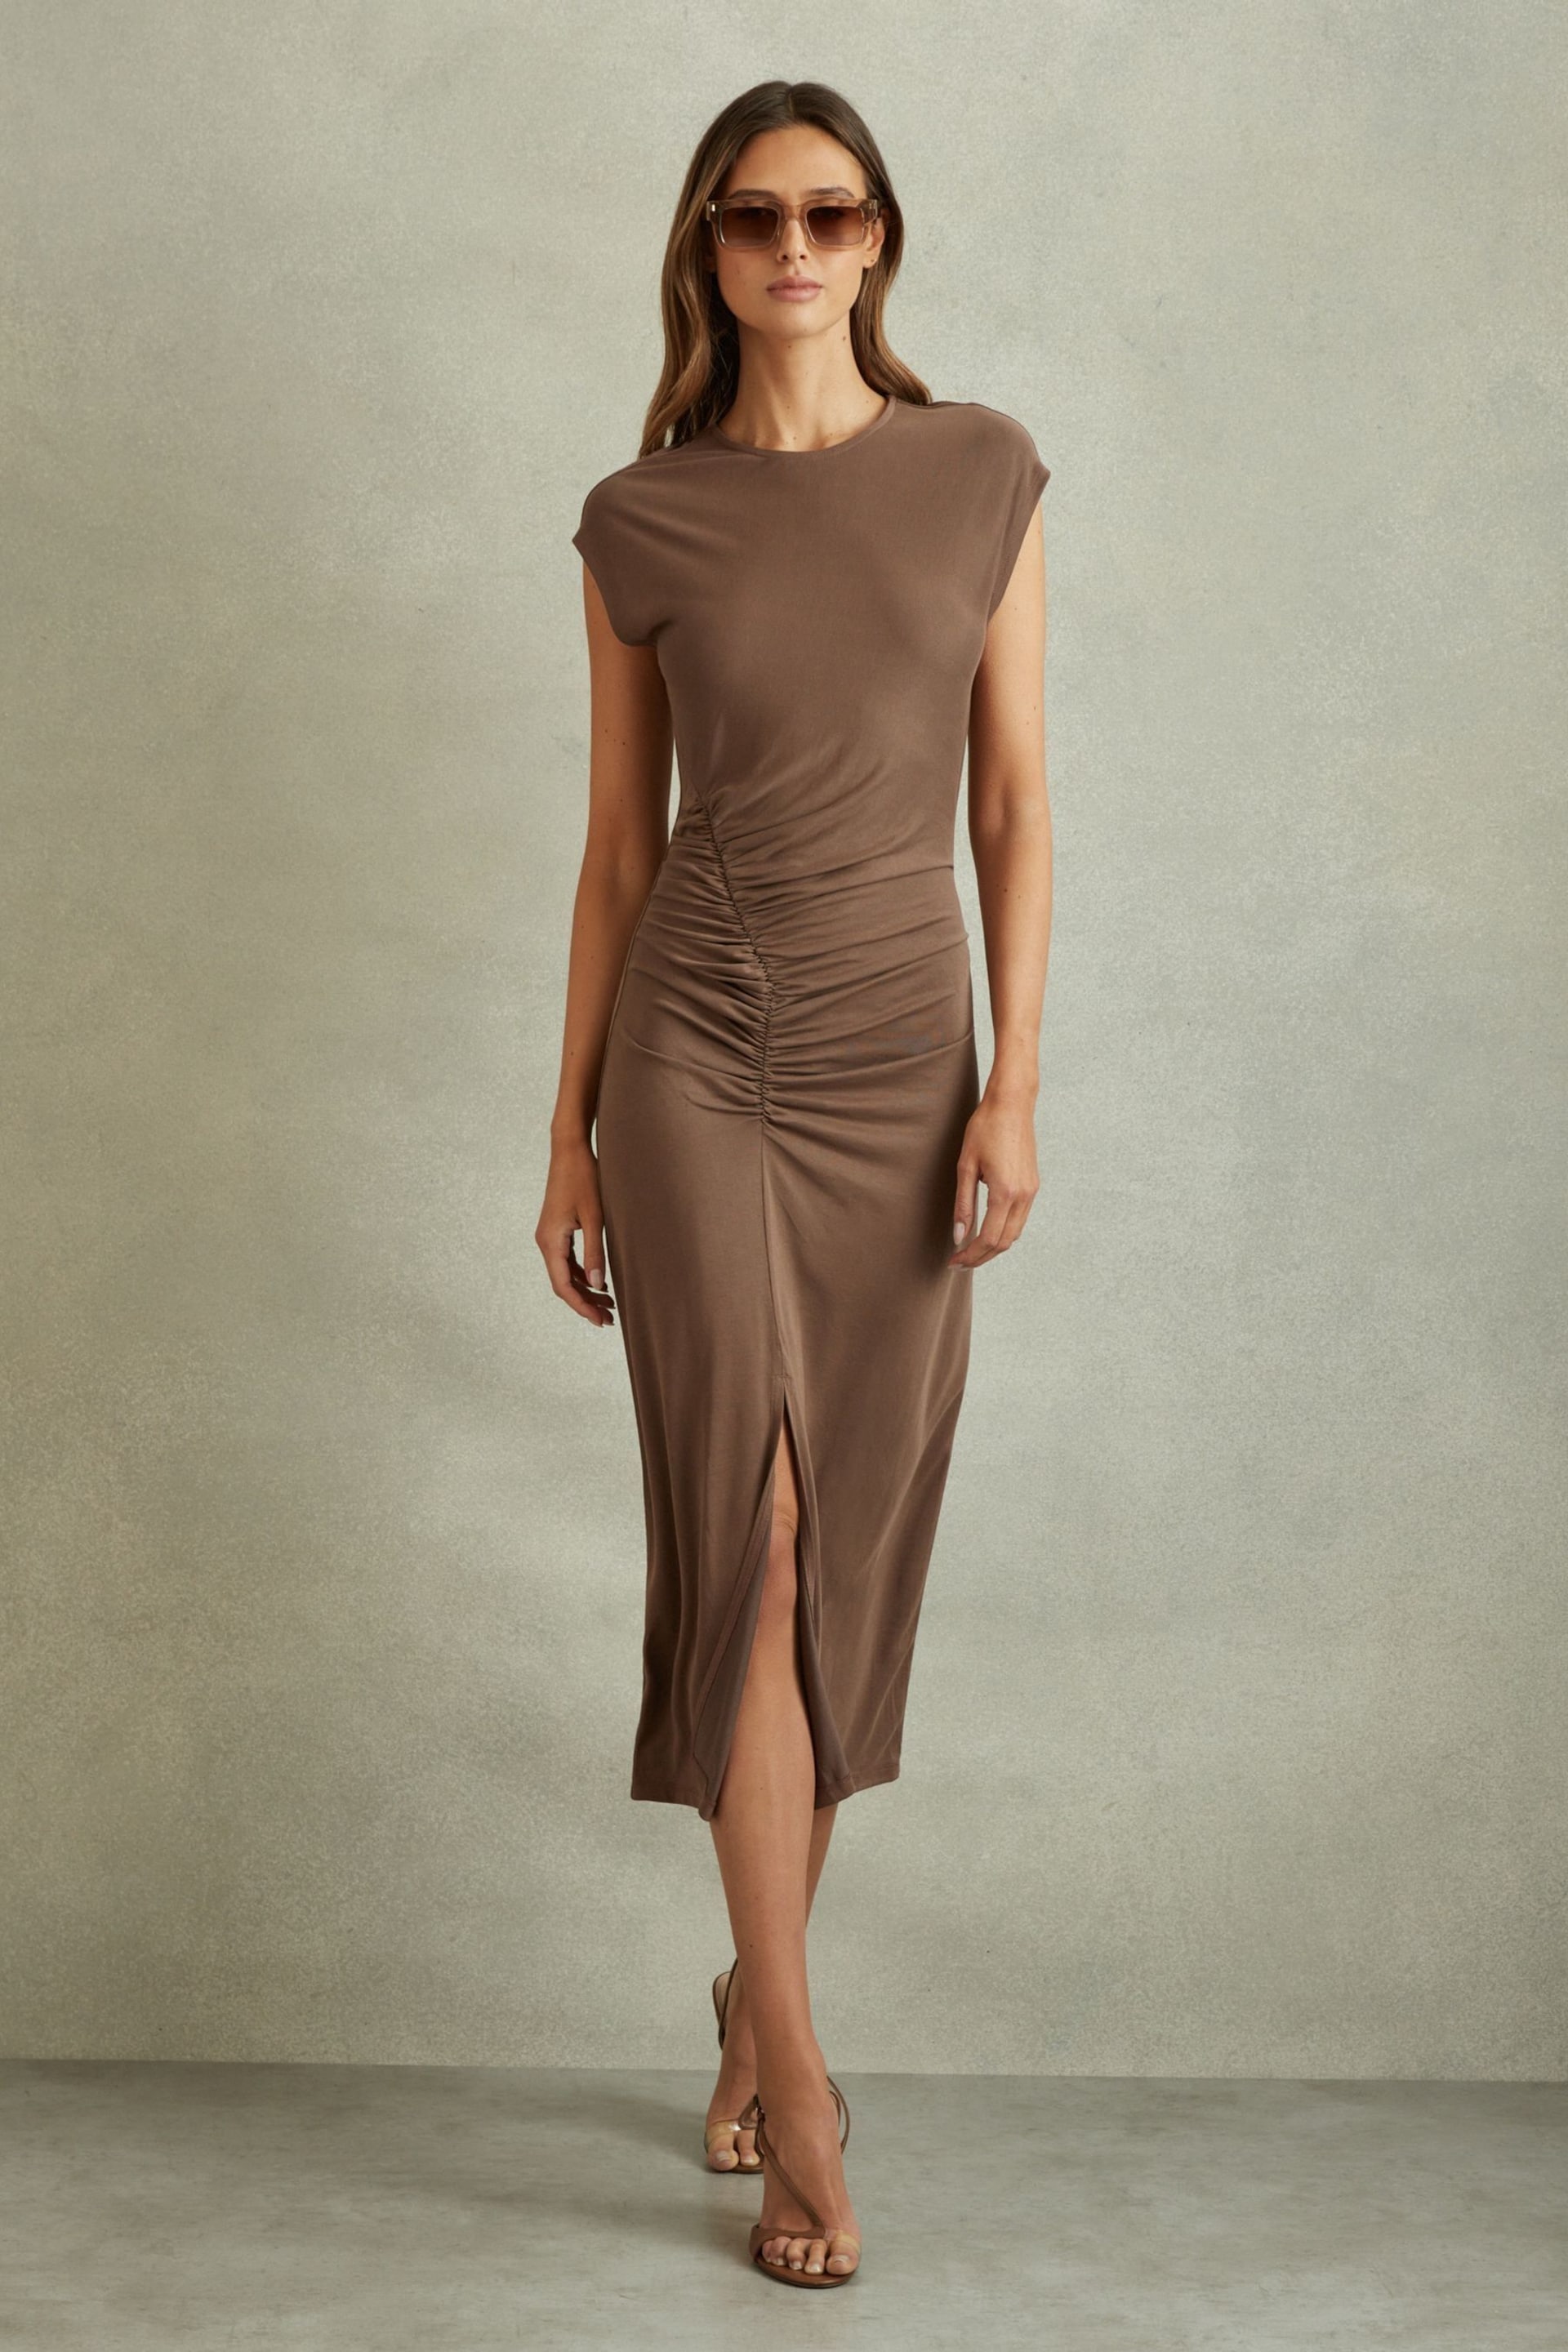 Reiss Chocolate Lenara Ruche Front Capped Sleeve Jersey Midi Dress - Image 3 of 6